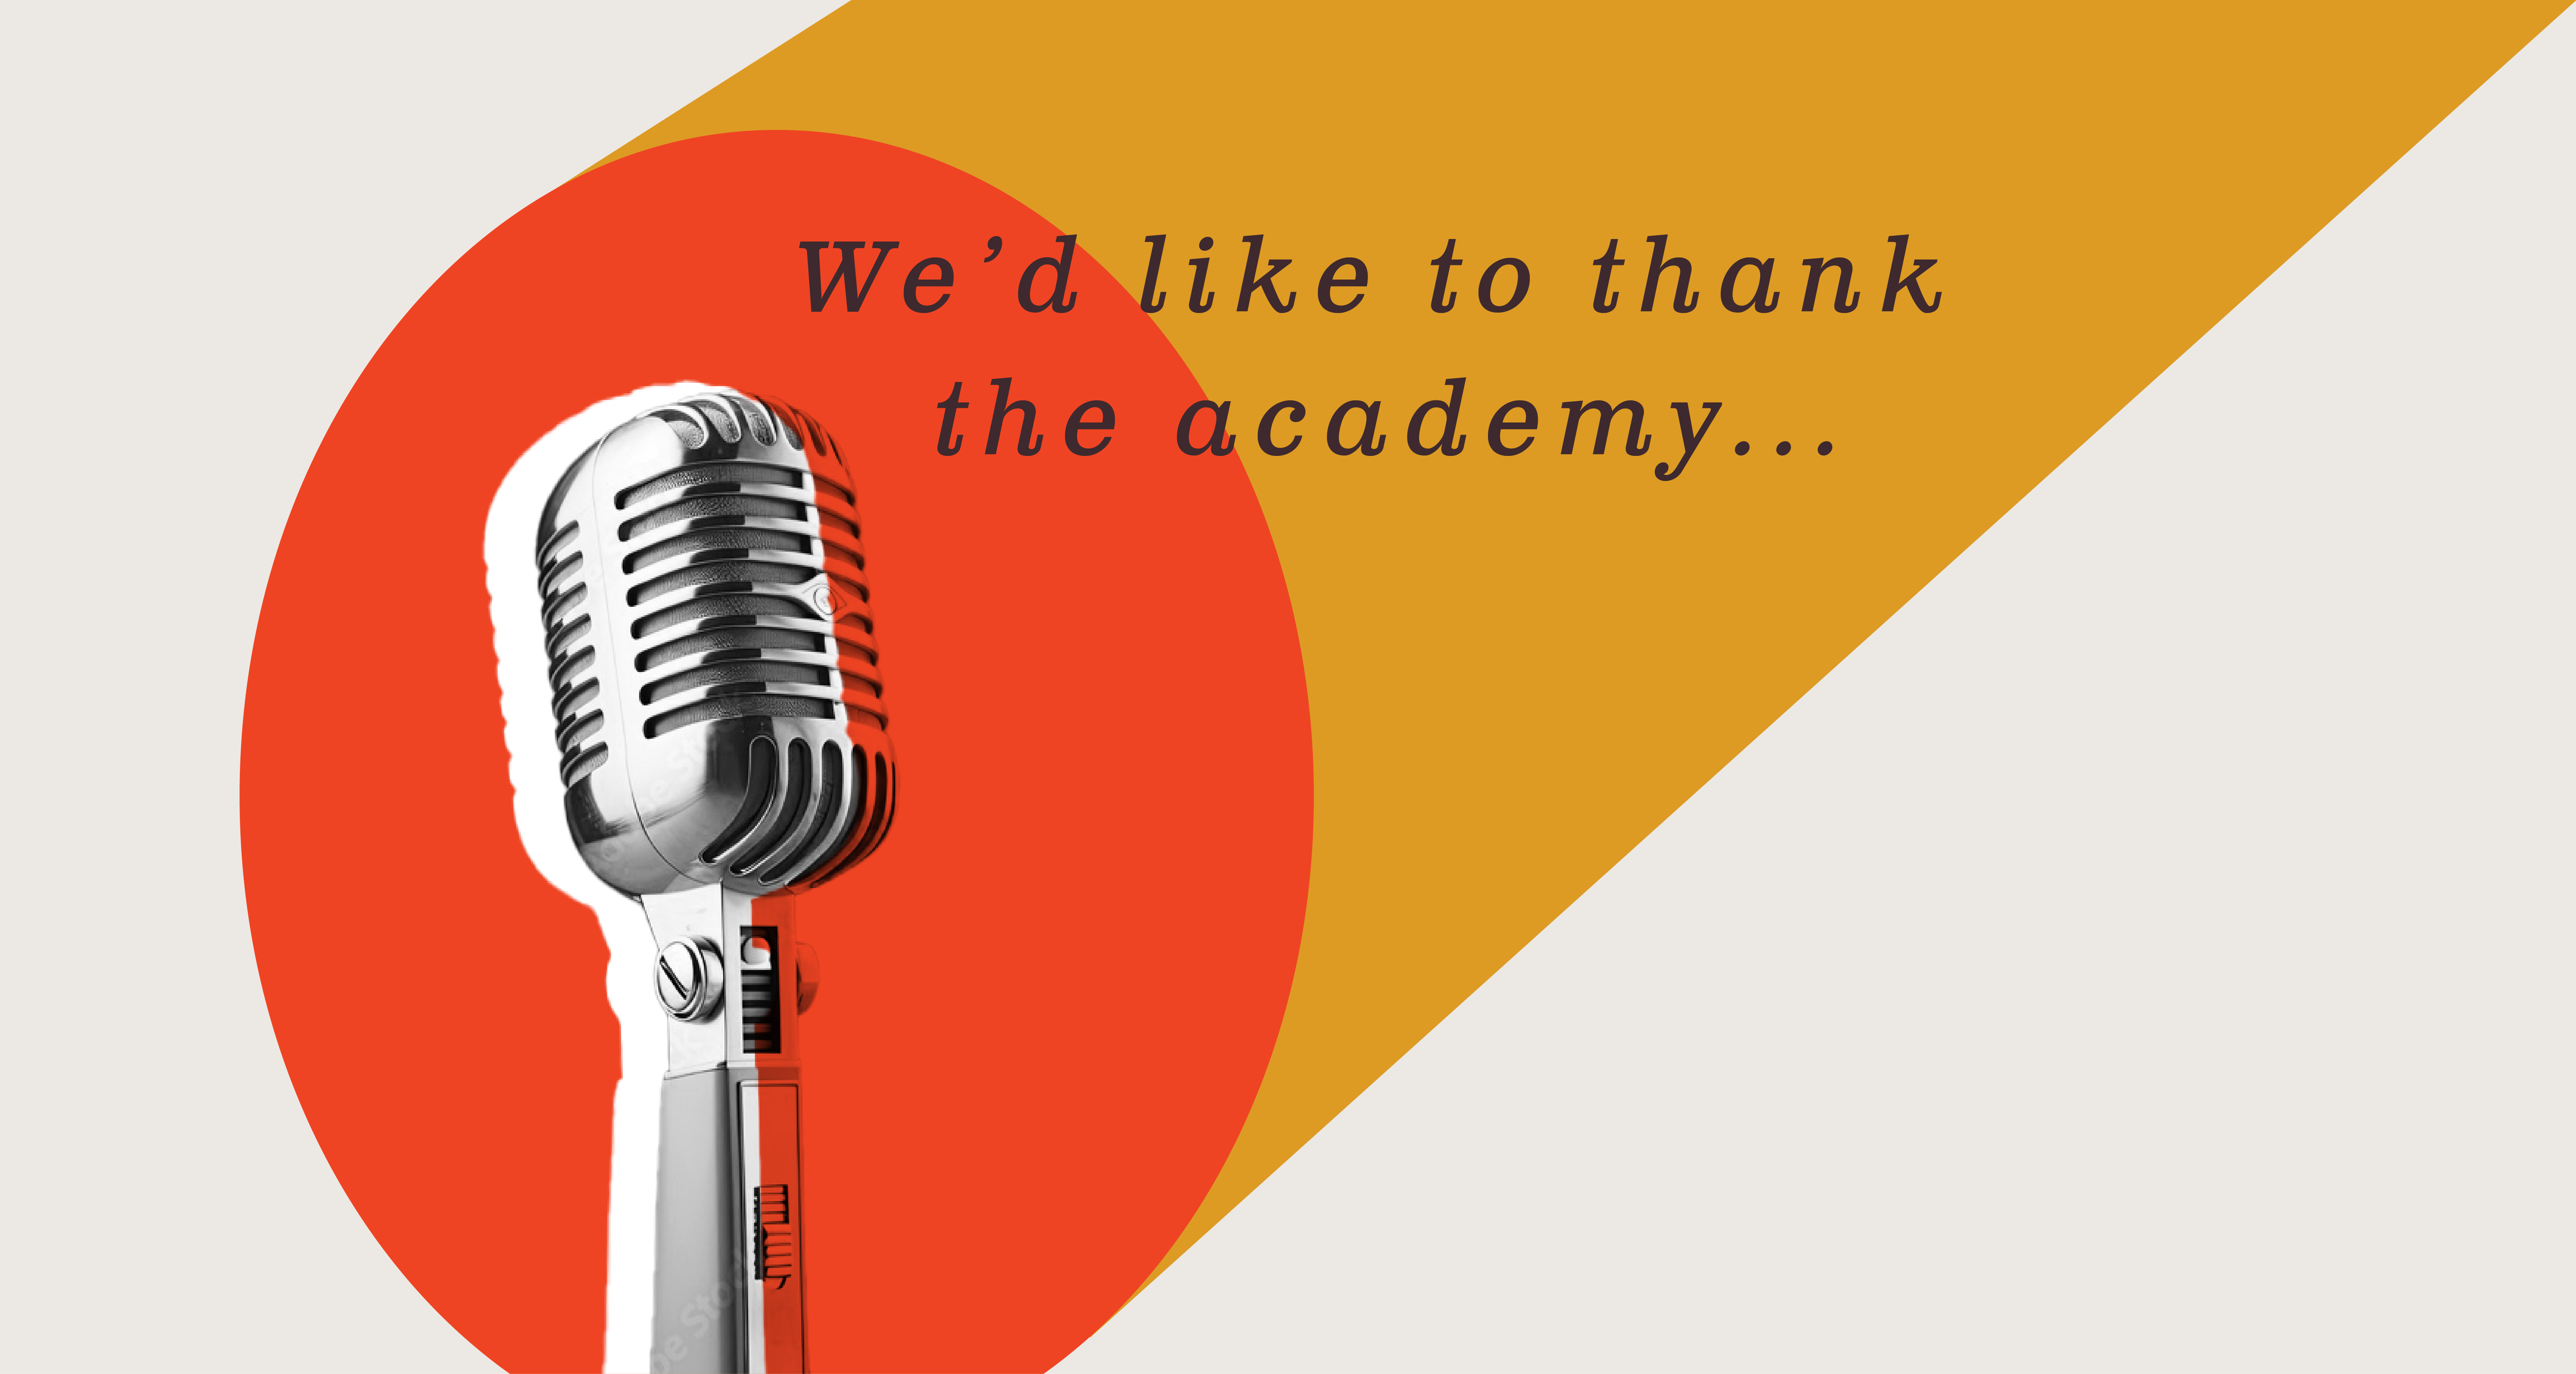 It’s ADDYs season. We’d like to thank the academy and, of course, you.